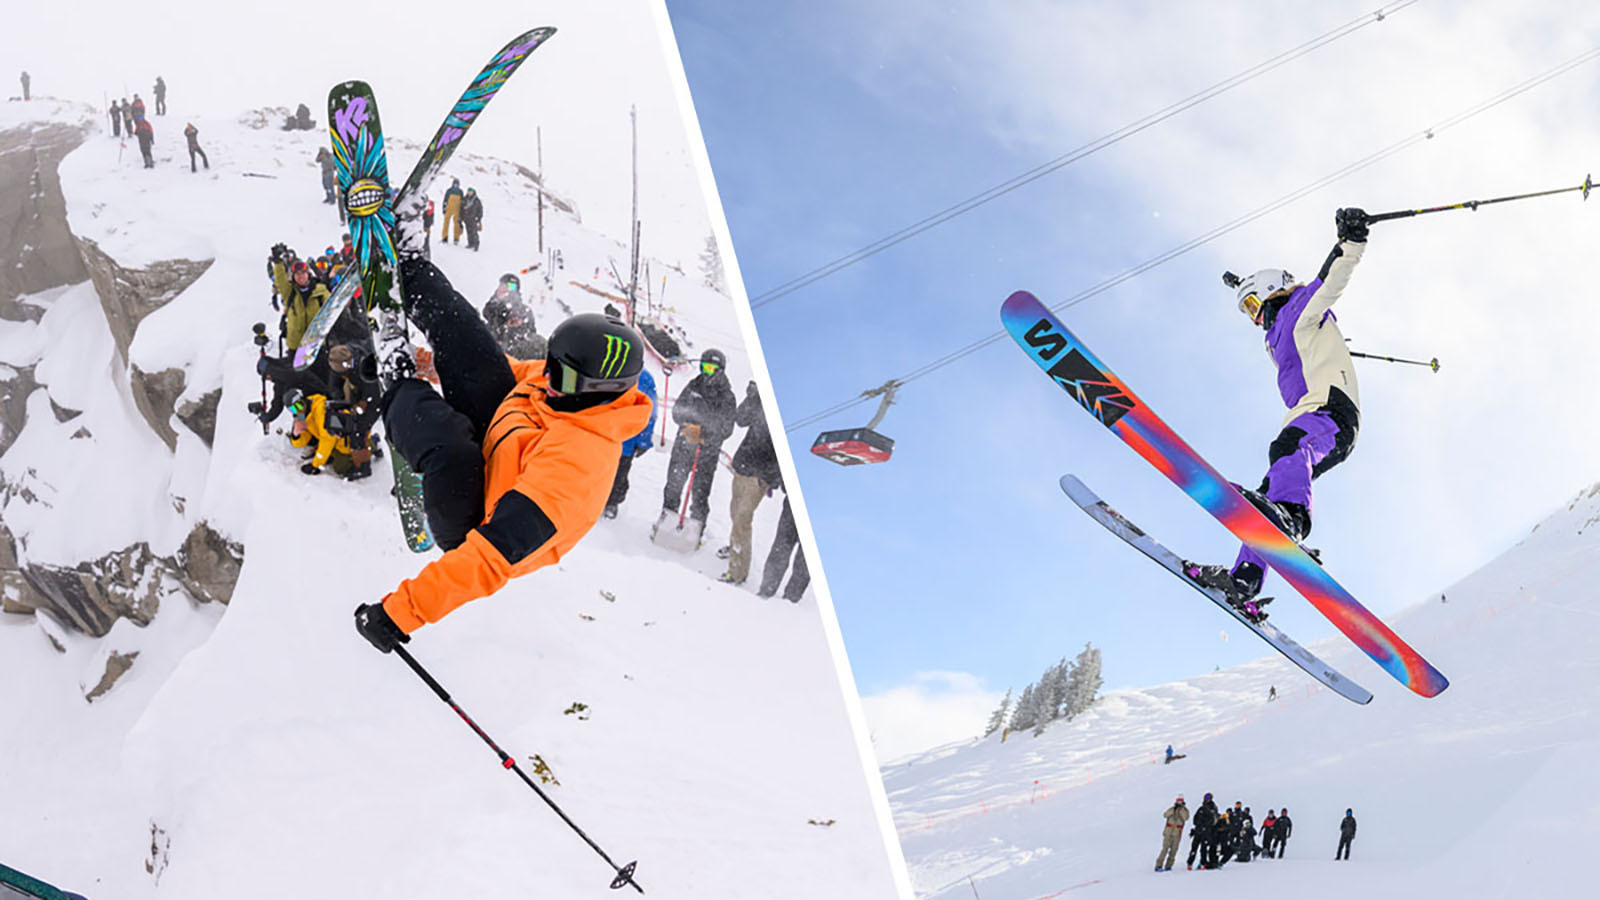 380 Inches Of Snow Made For Another Fantastic Kings And Queens Of Corbets Ski Competition In Jackson Your Wyoming News Source pic picture